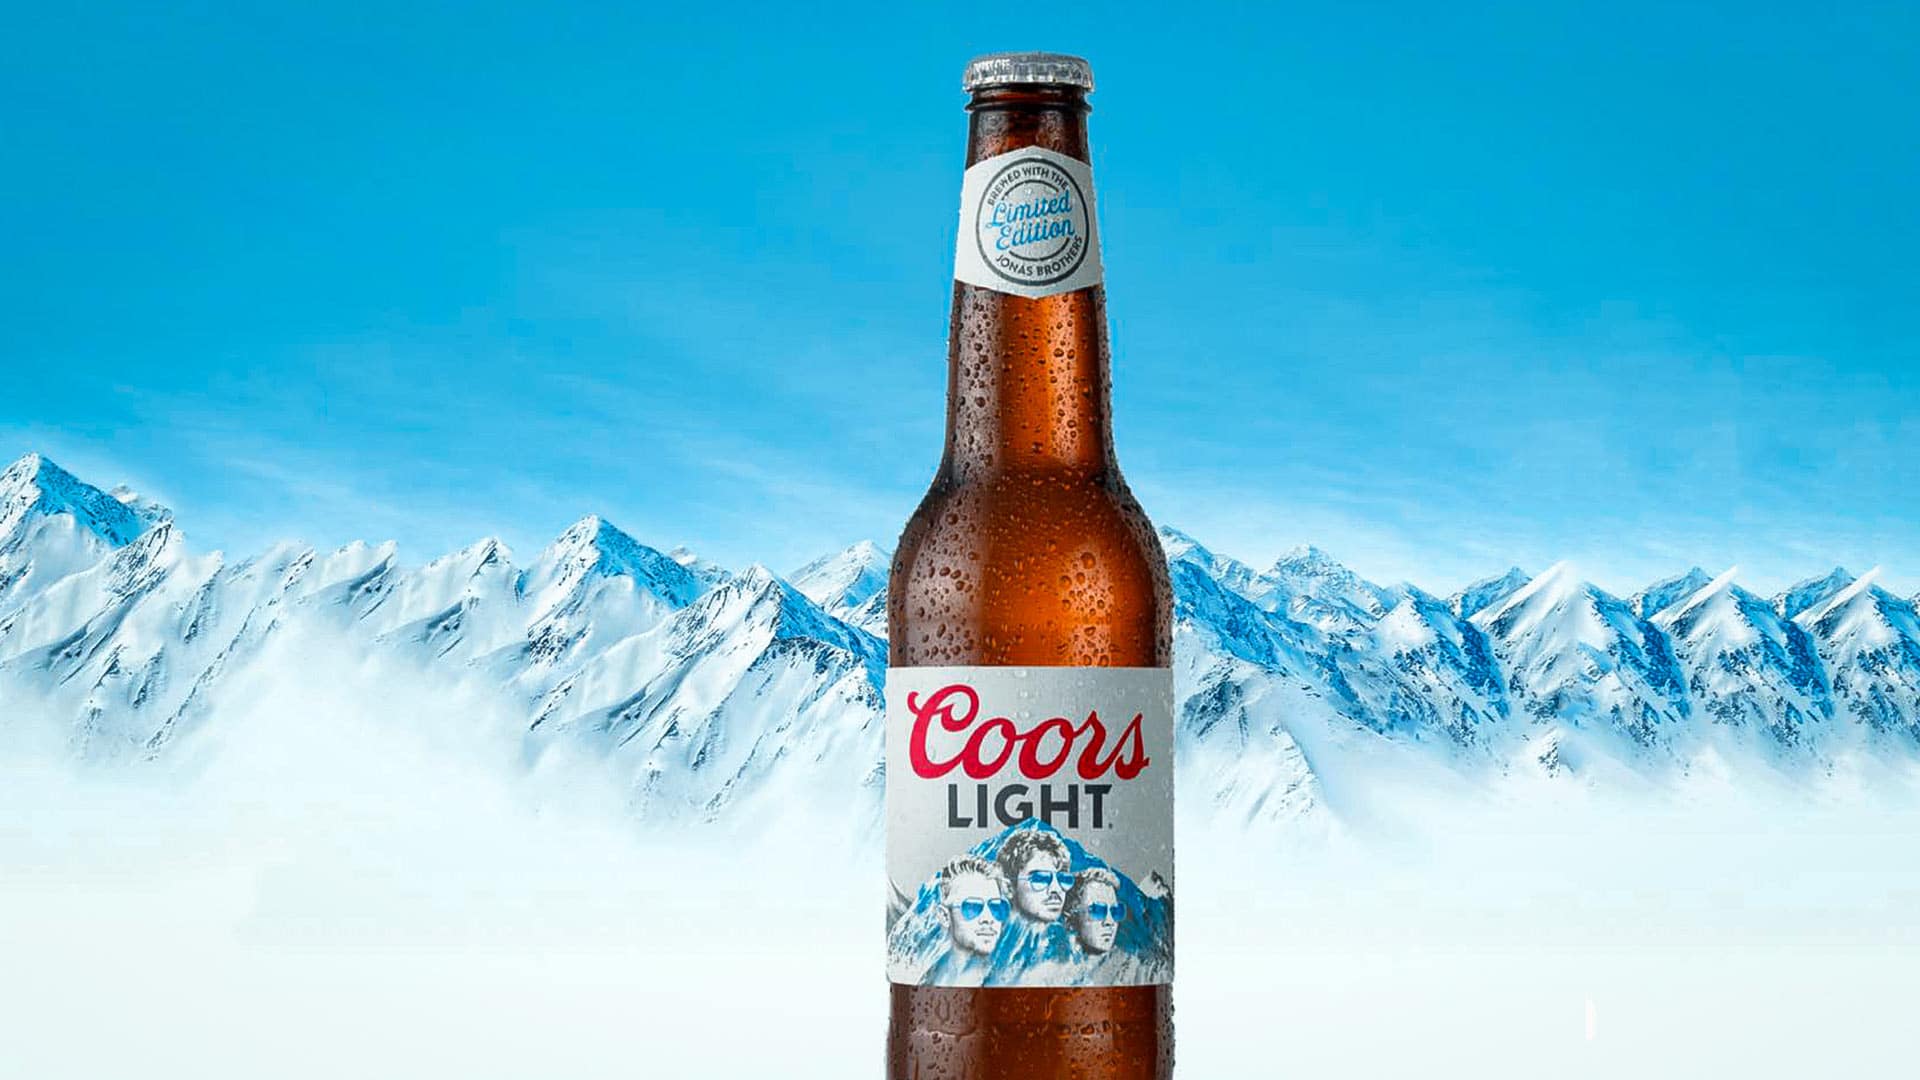 What Are The Ingredients In Coors Light